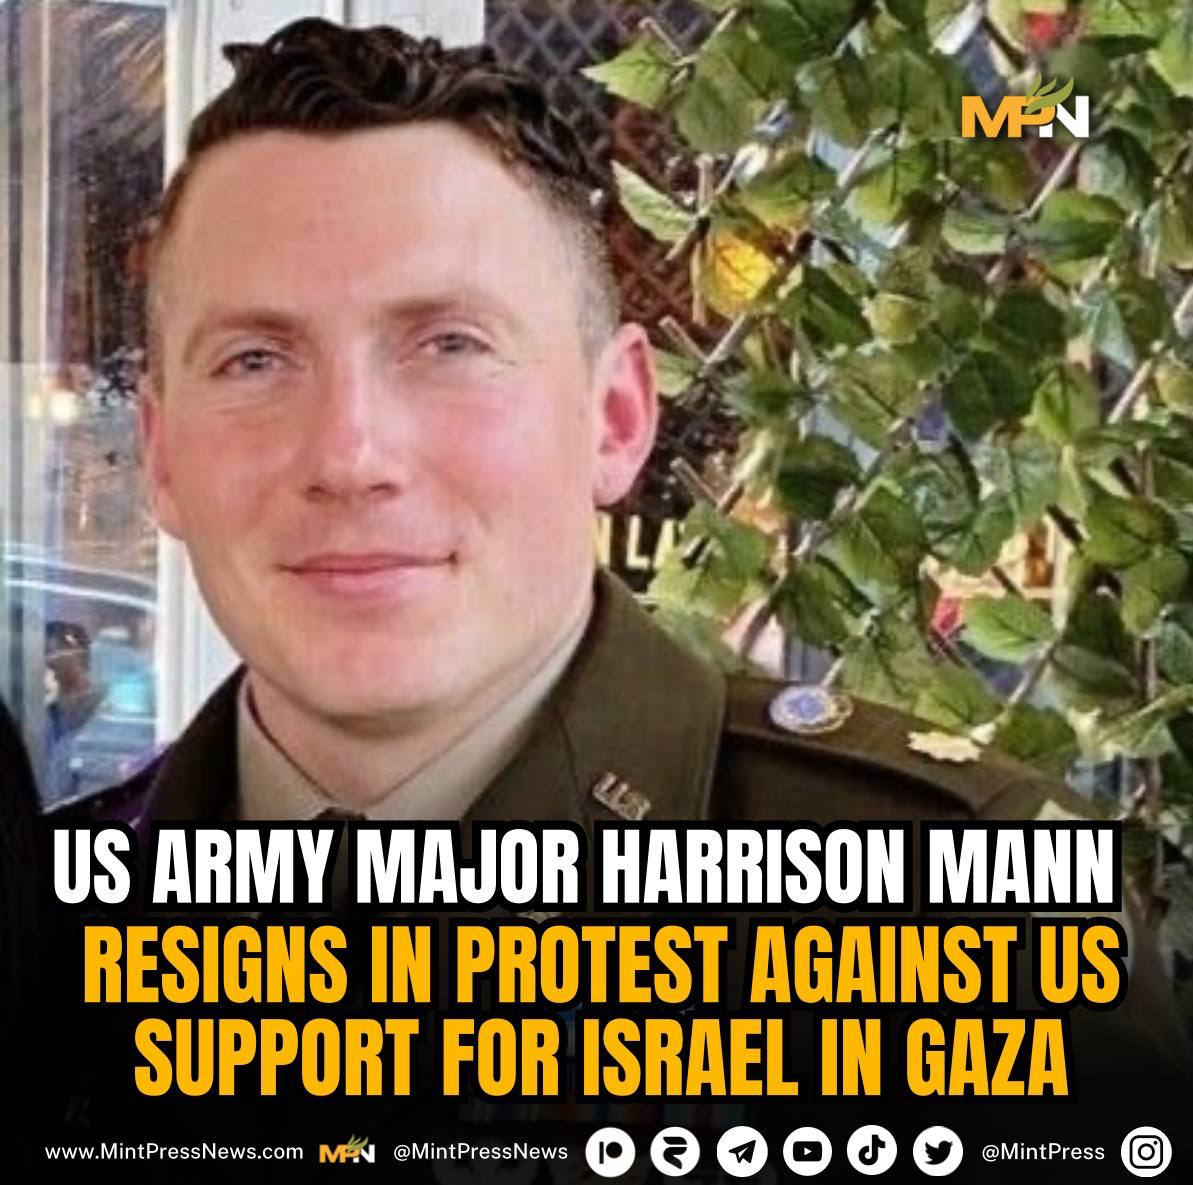 US Army Major resigns in protest against Israel's Gaza genocide Harrison Mann, who works for a US intelligence agency, has resigned over his government's support for Israel. He argues it has 'enabled and empowered the killing and starvation of tens of thousands of innocent…